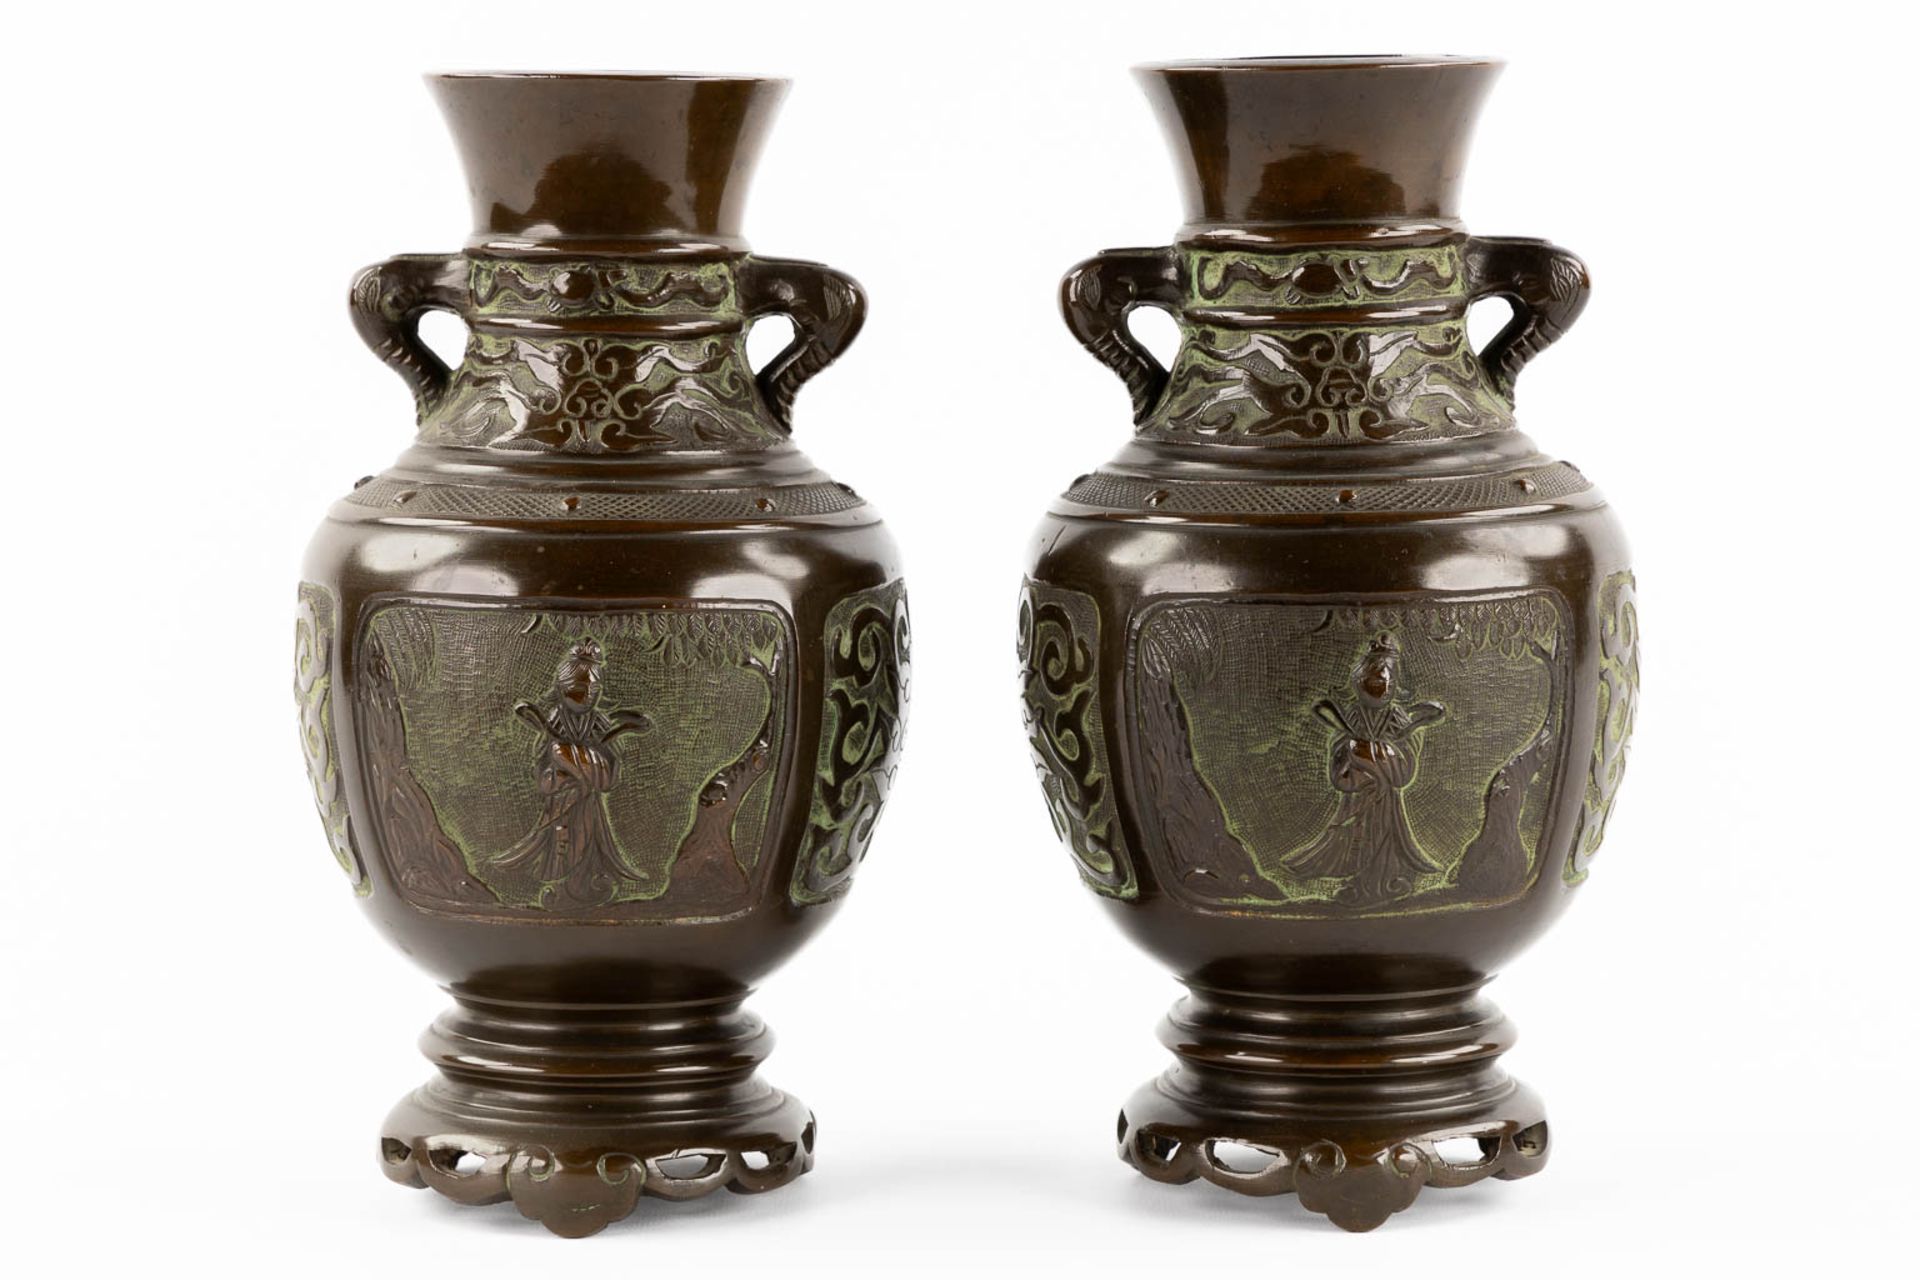 A pair of Japanese vases, patinated bronze. 19th C. (H:26 x D:14 cm) - Image 5 of 11